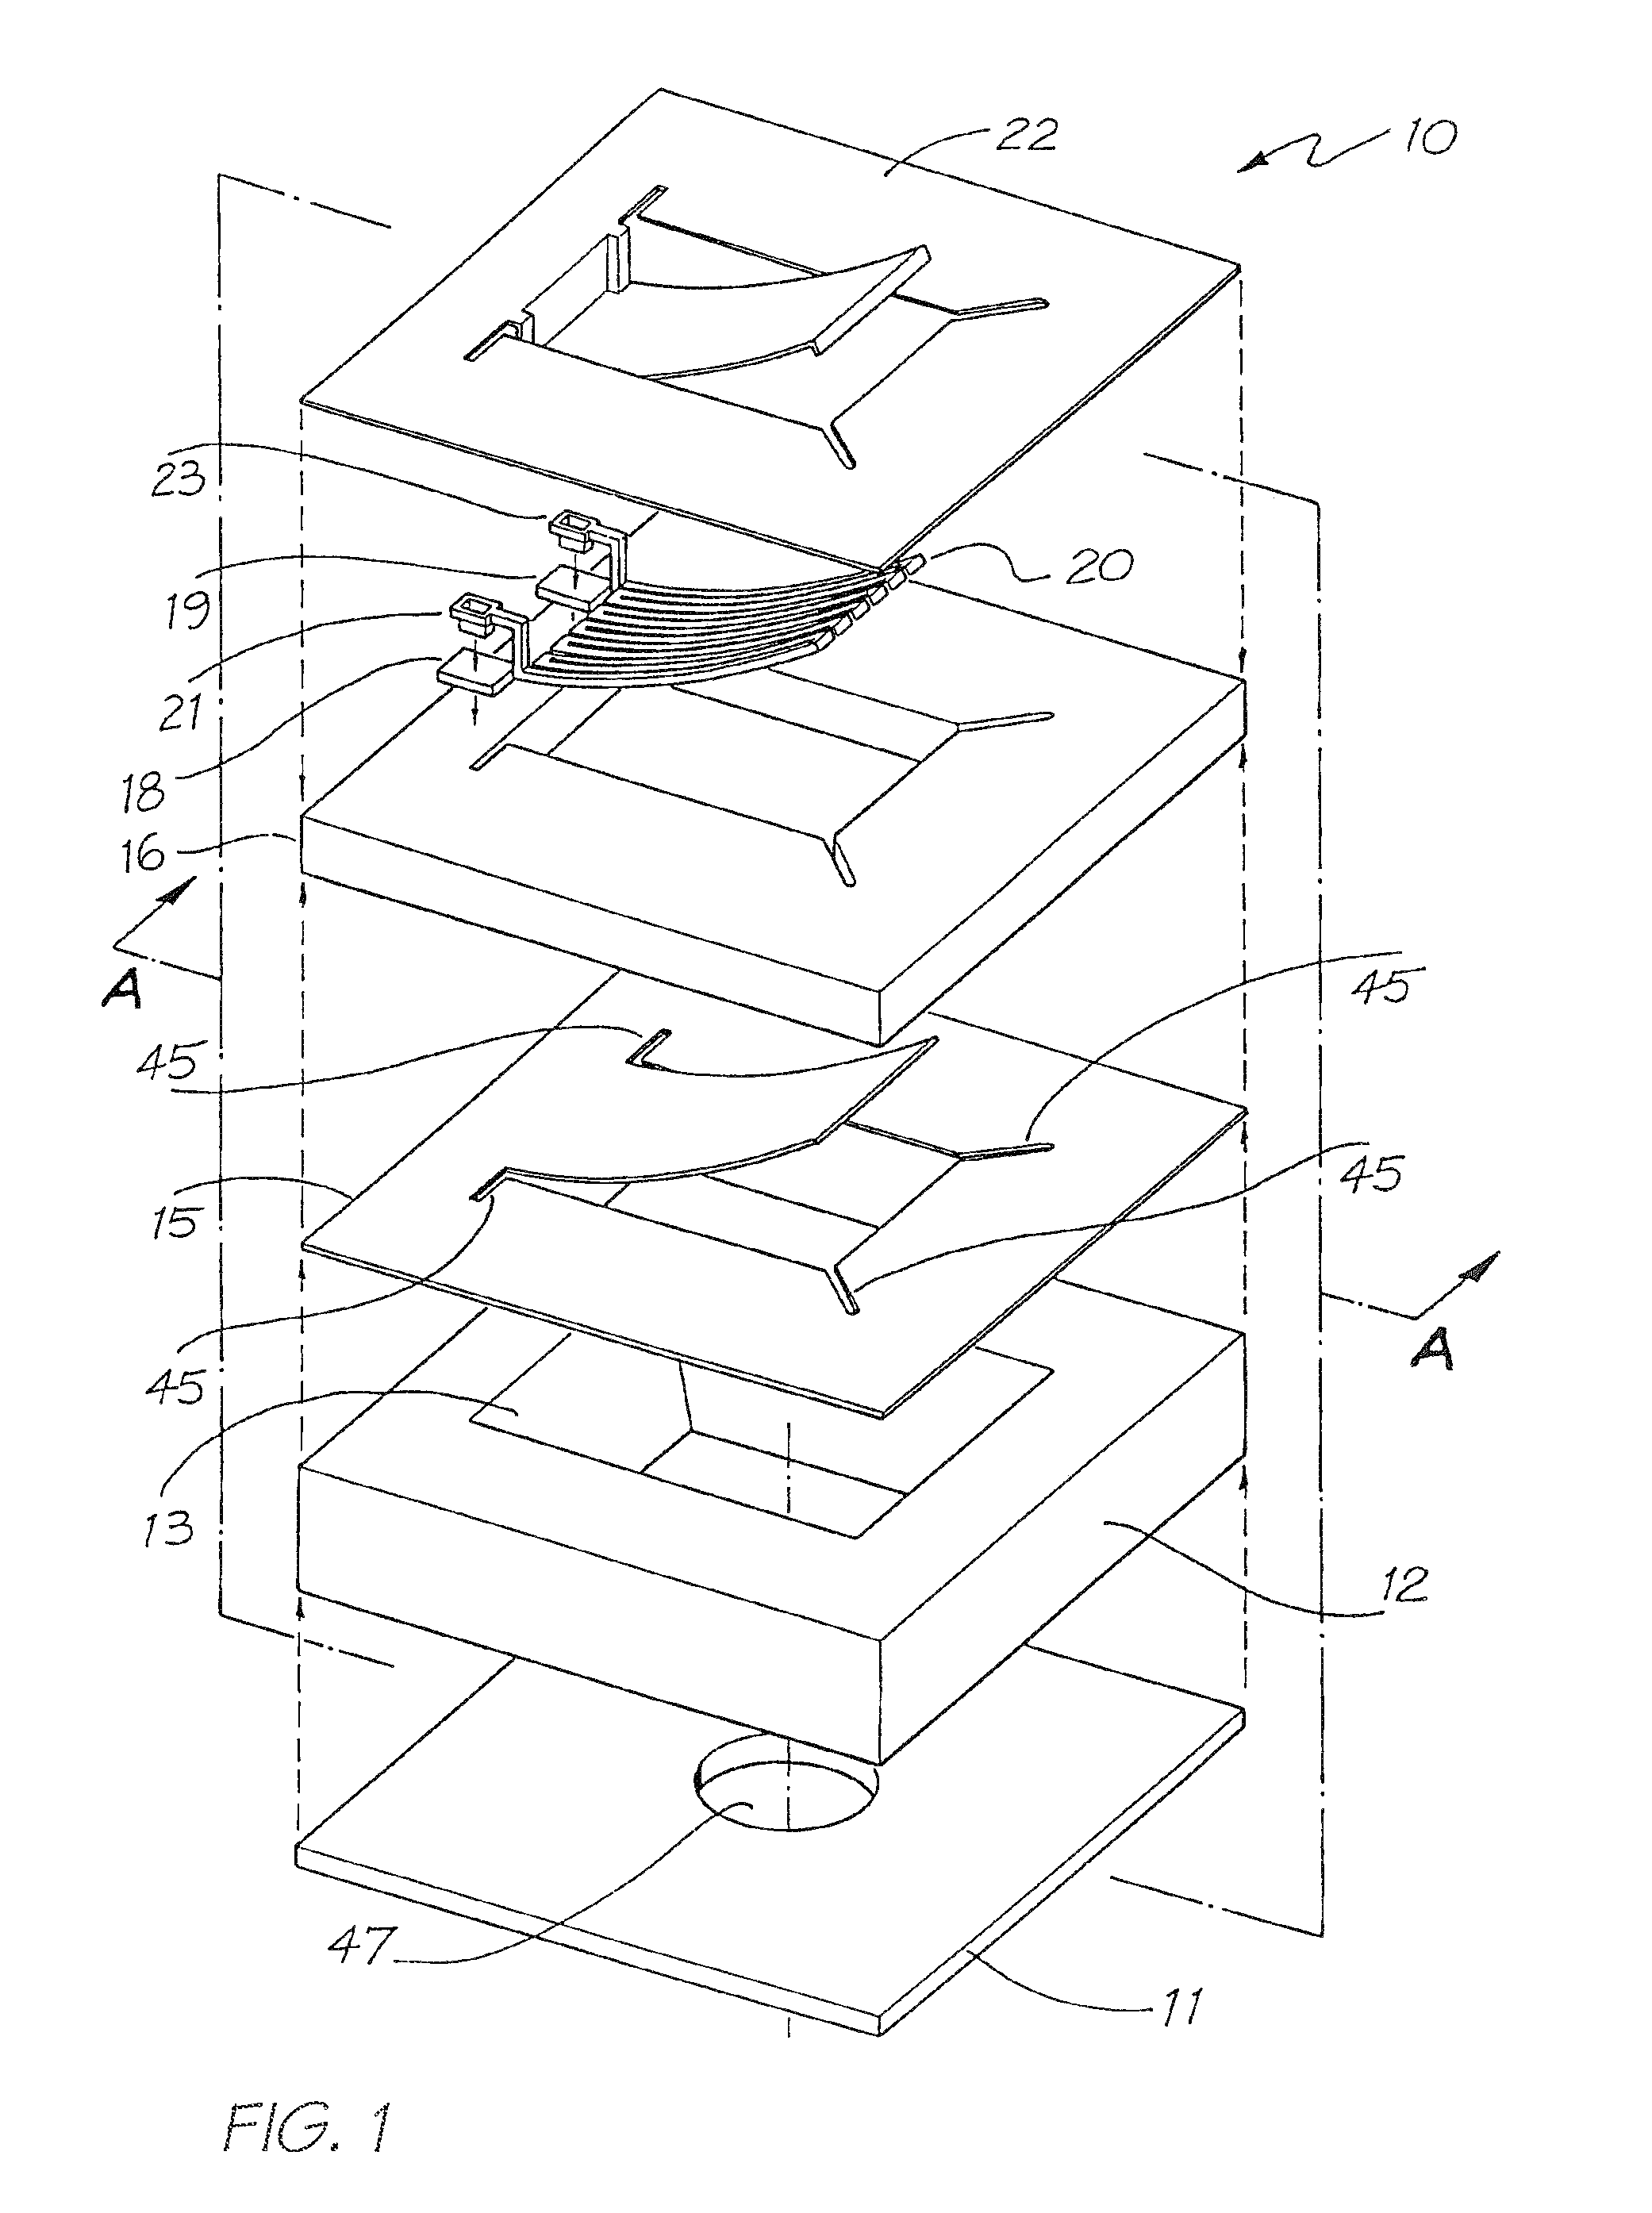 Printhead With Low Power Actuators